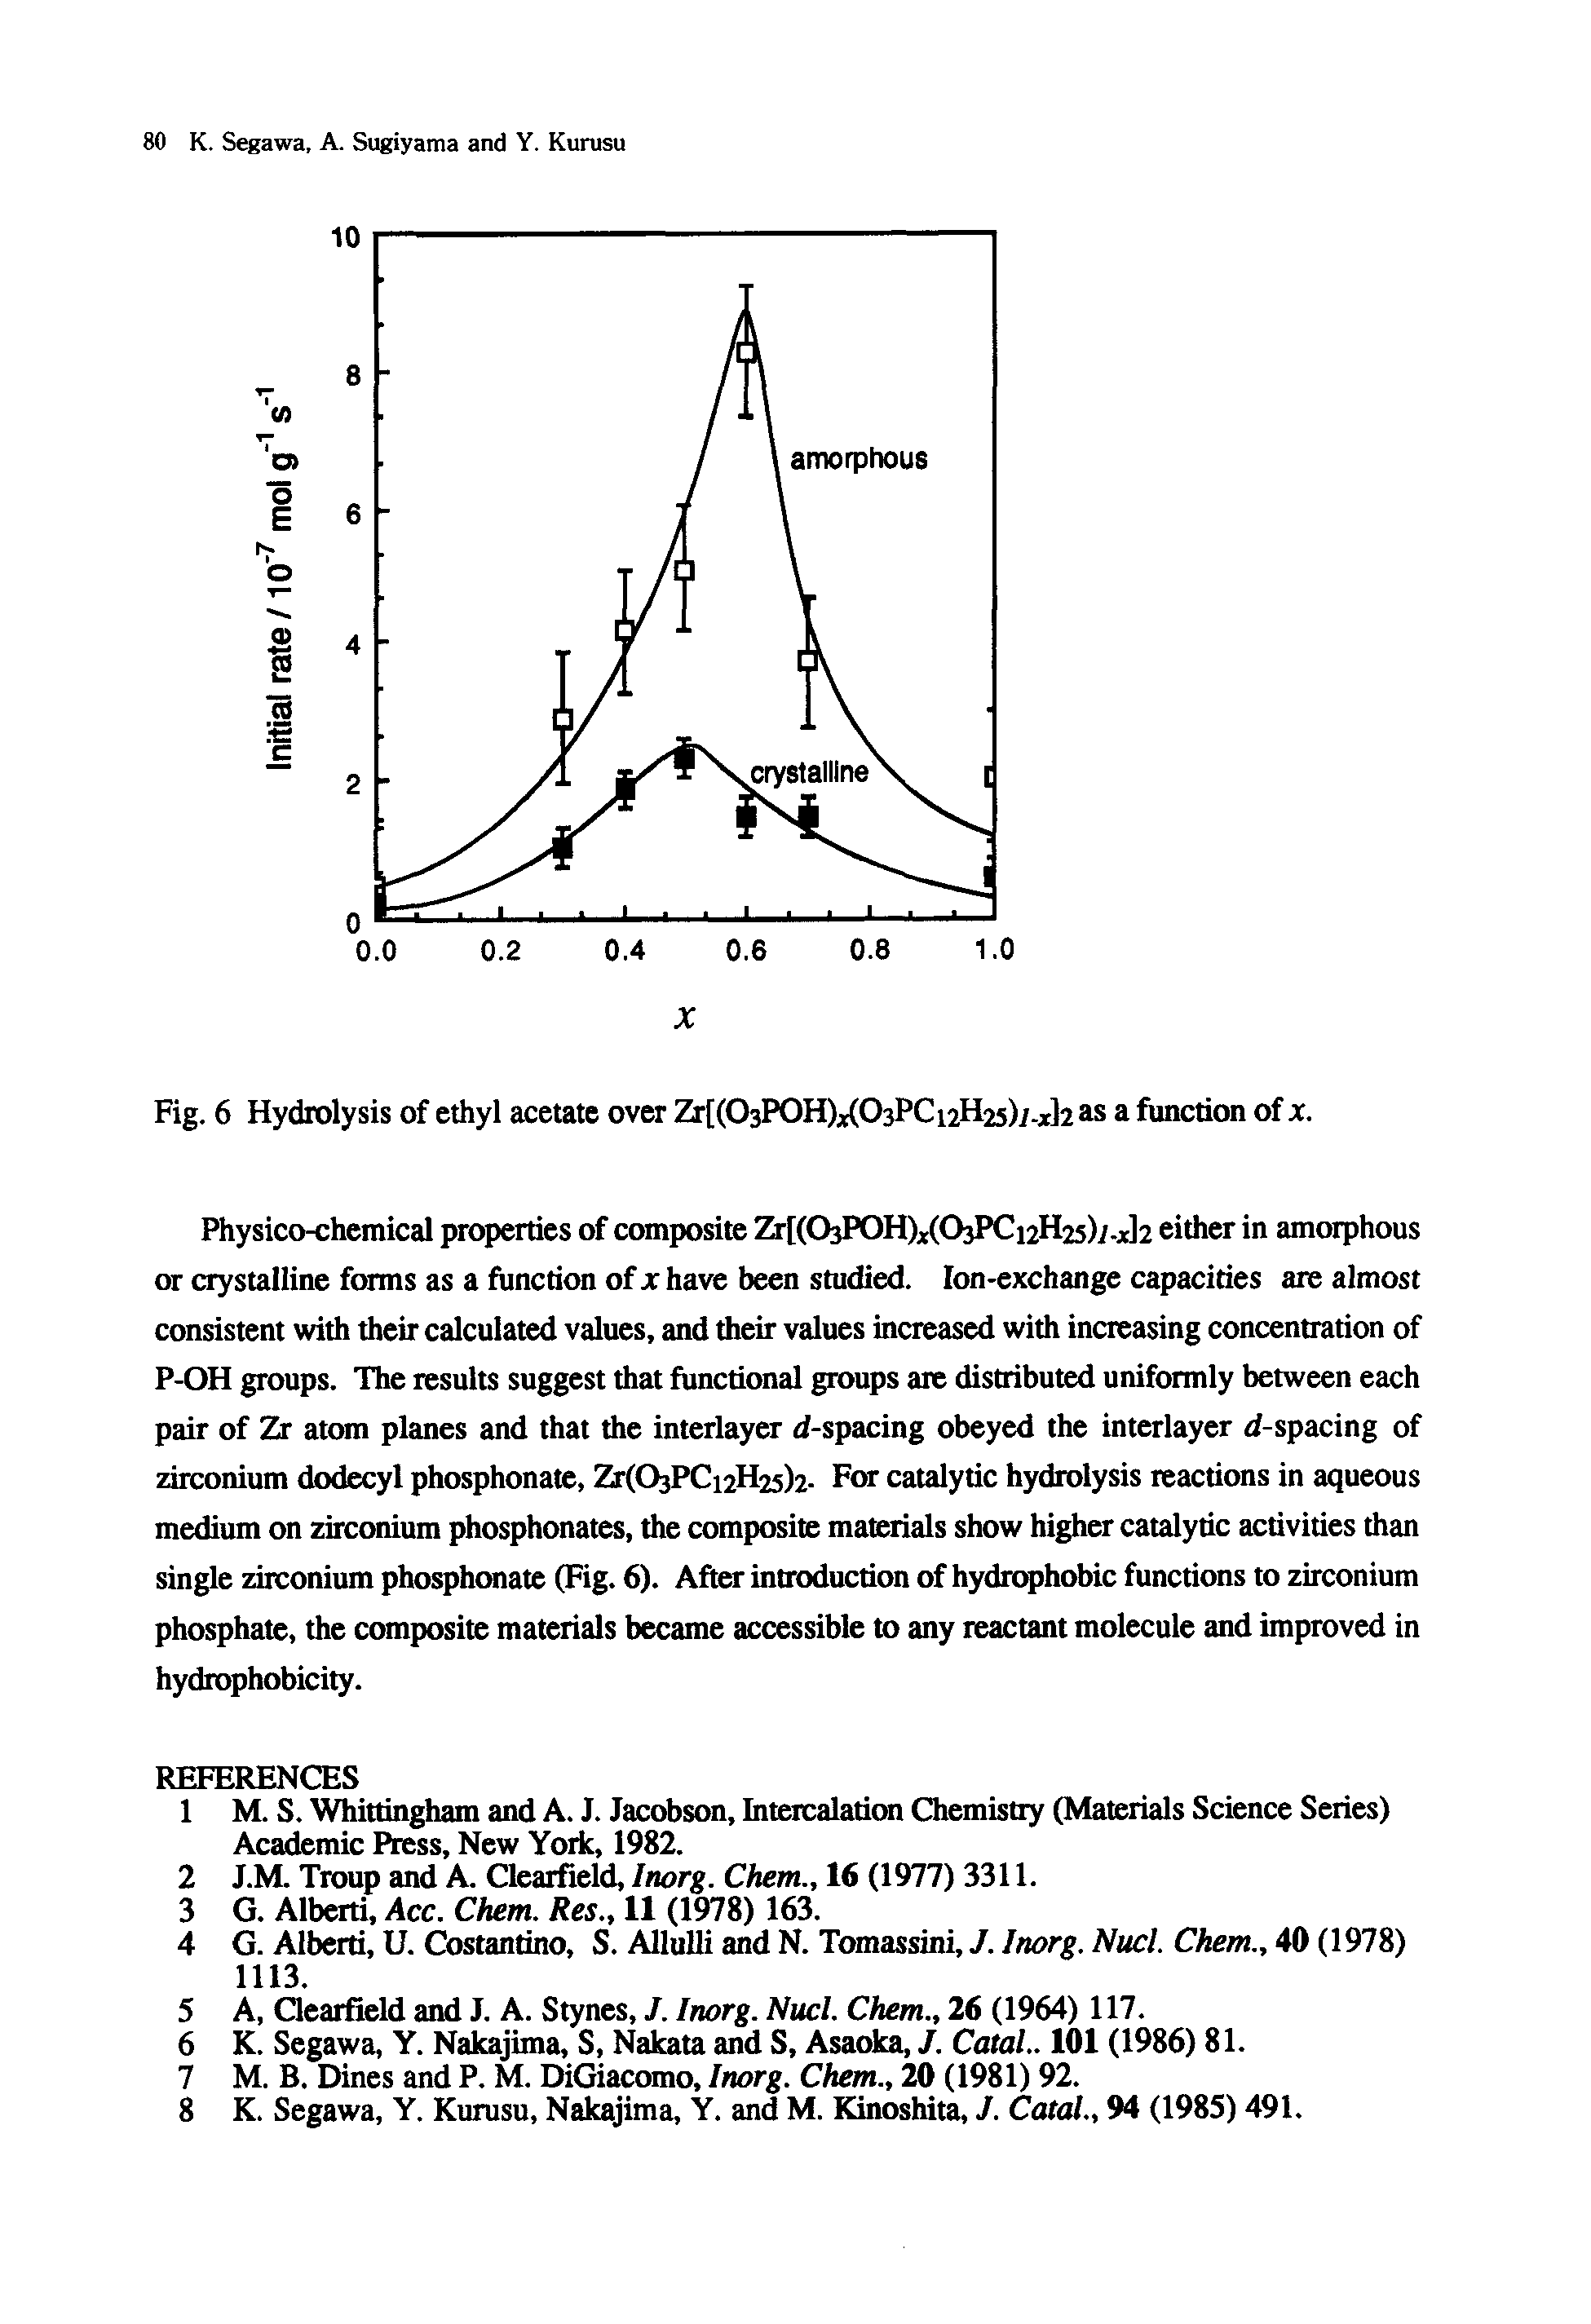 Fig. 6 Hydrolysis of ethyl acetate over Zr[(03P0H) (03PCi2H25)7.j2 as a function of x.